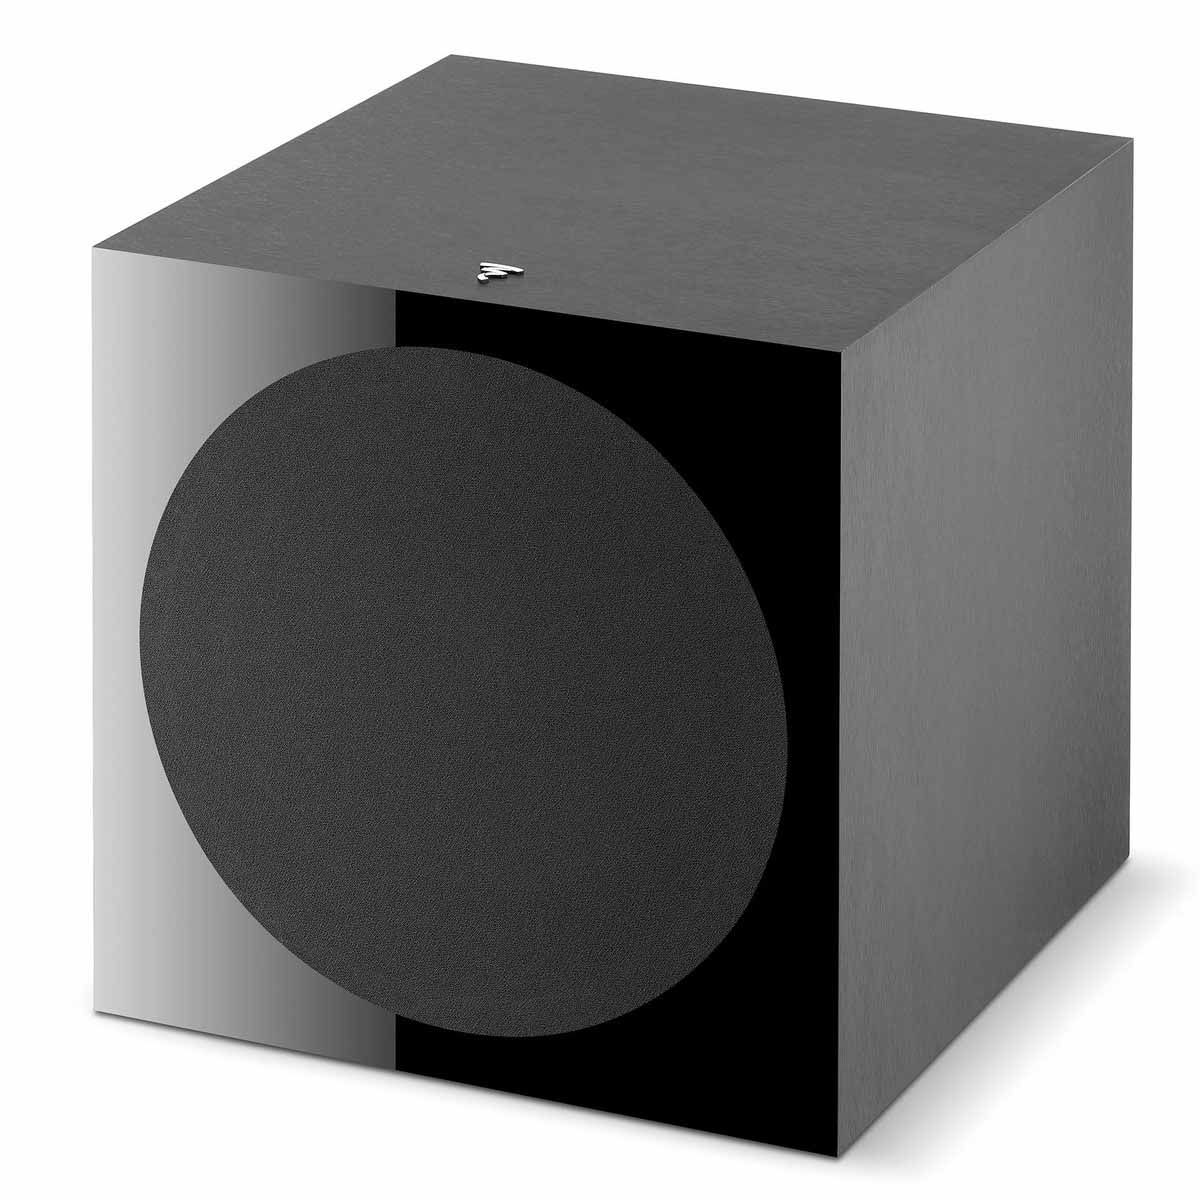 Focal Sub 600P Subwoofer angled front view with grille